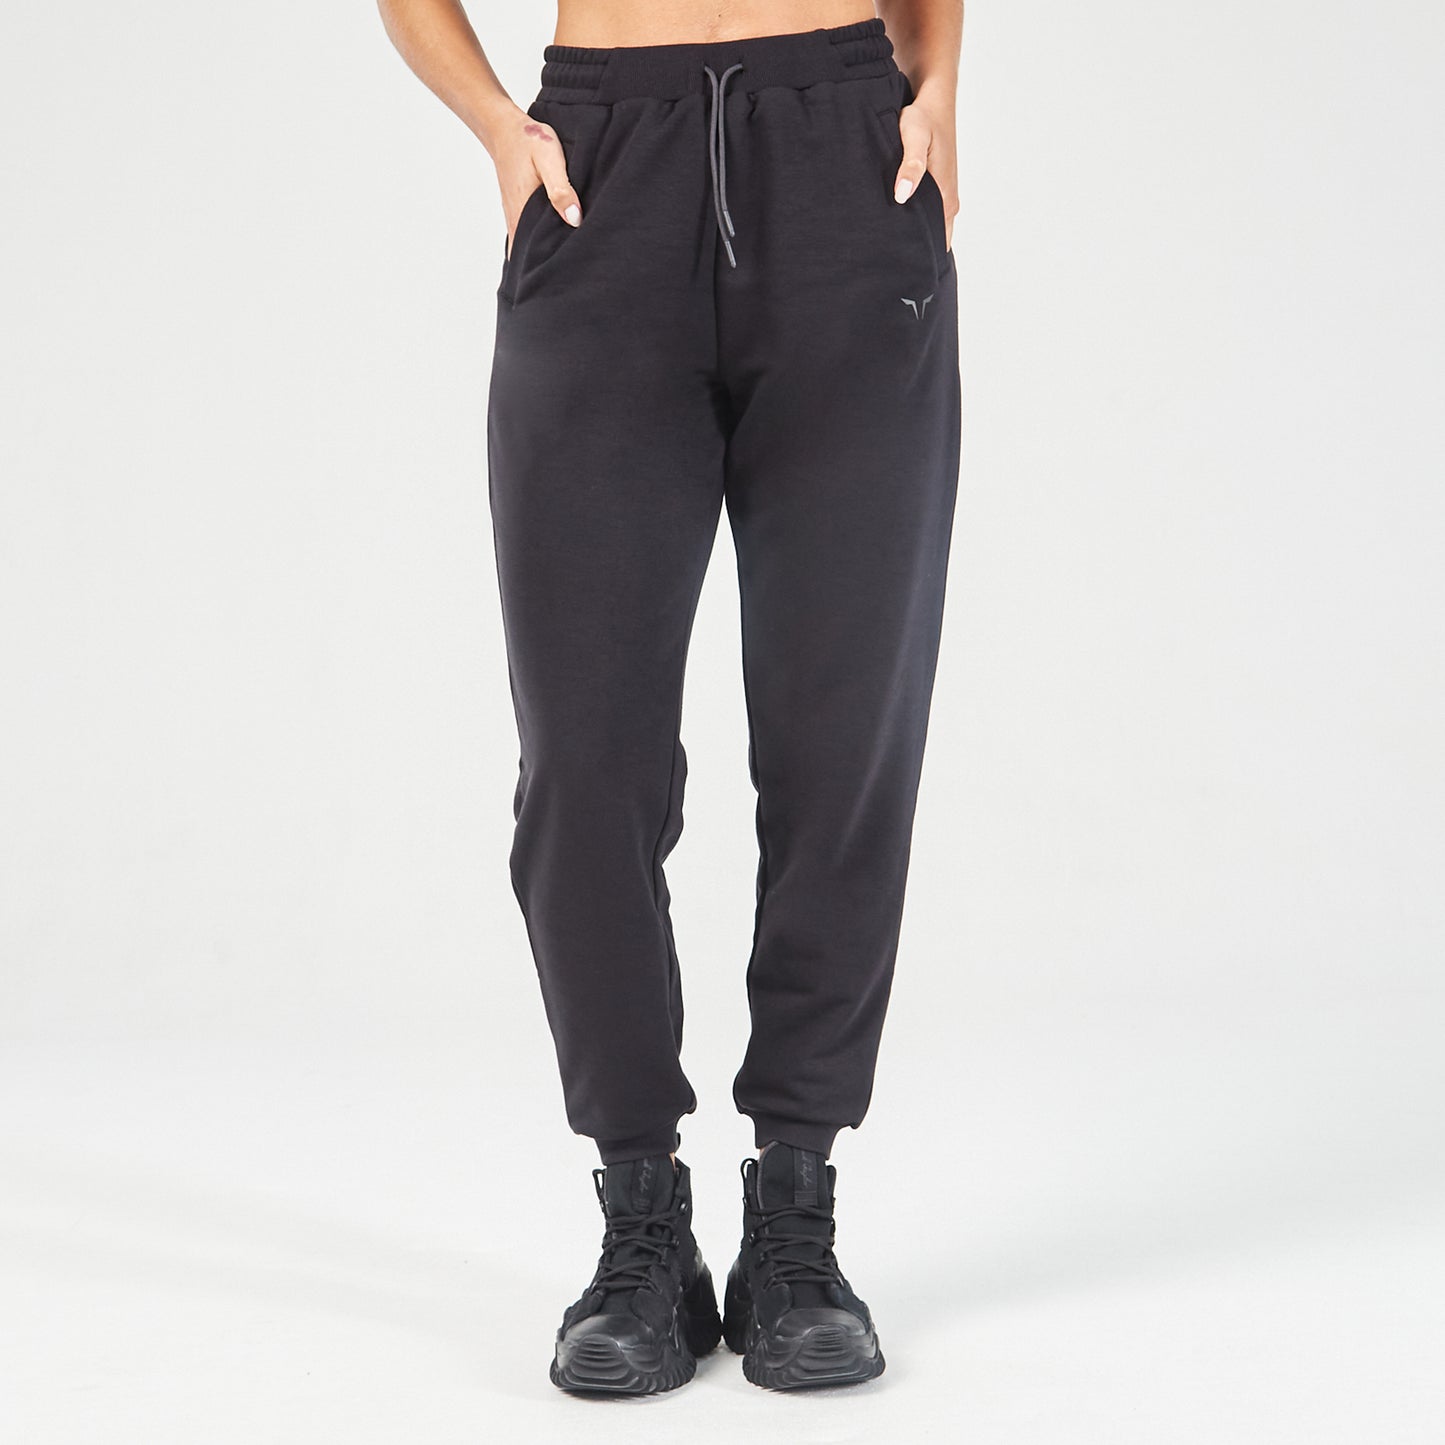 squatwolf-workout-clothes-essential-relaxed-joggers-black-gym-pants-for-women